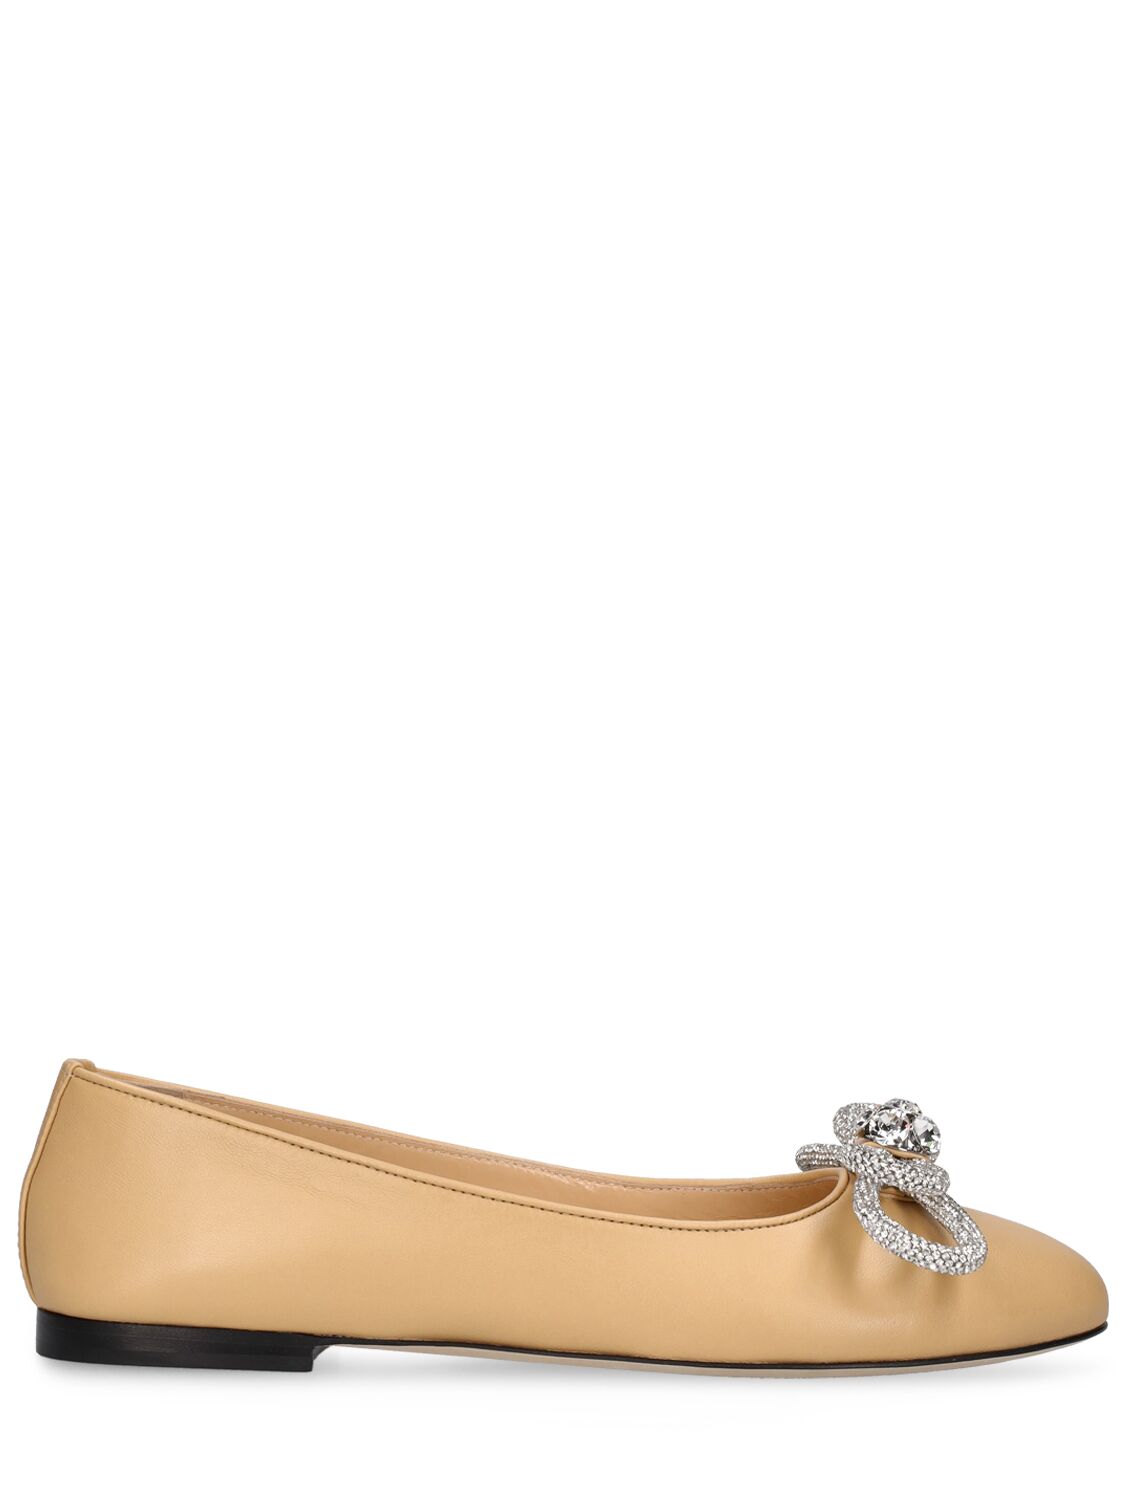 Mach & Mach 10mm Double Bow Leather Ballerina Flats In Nude